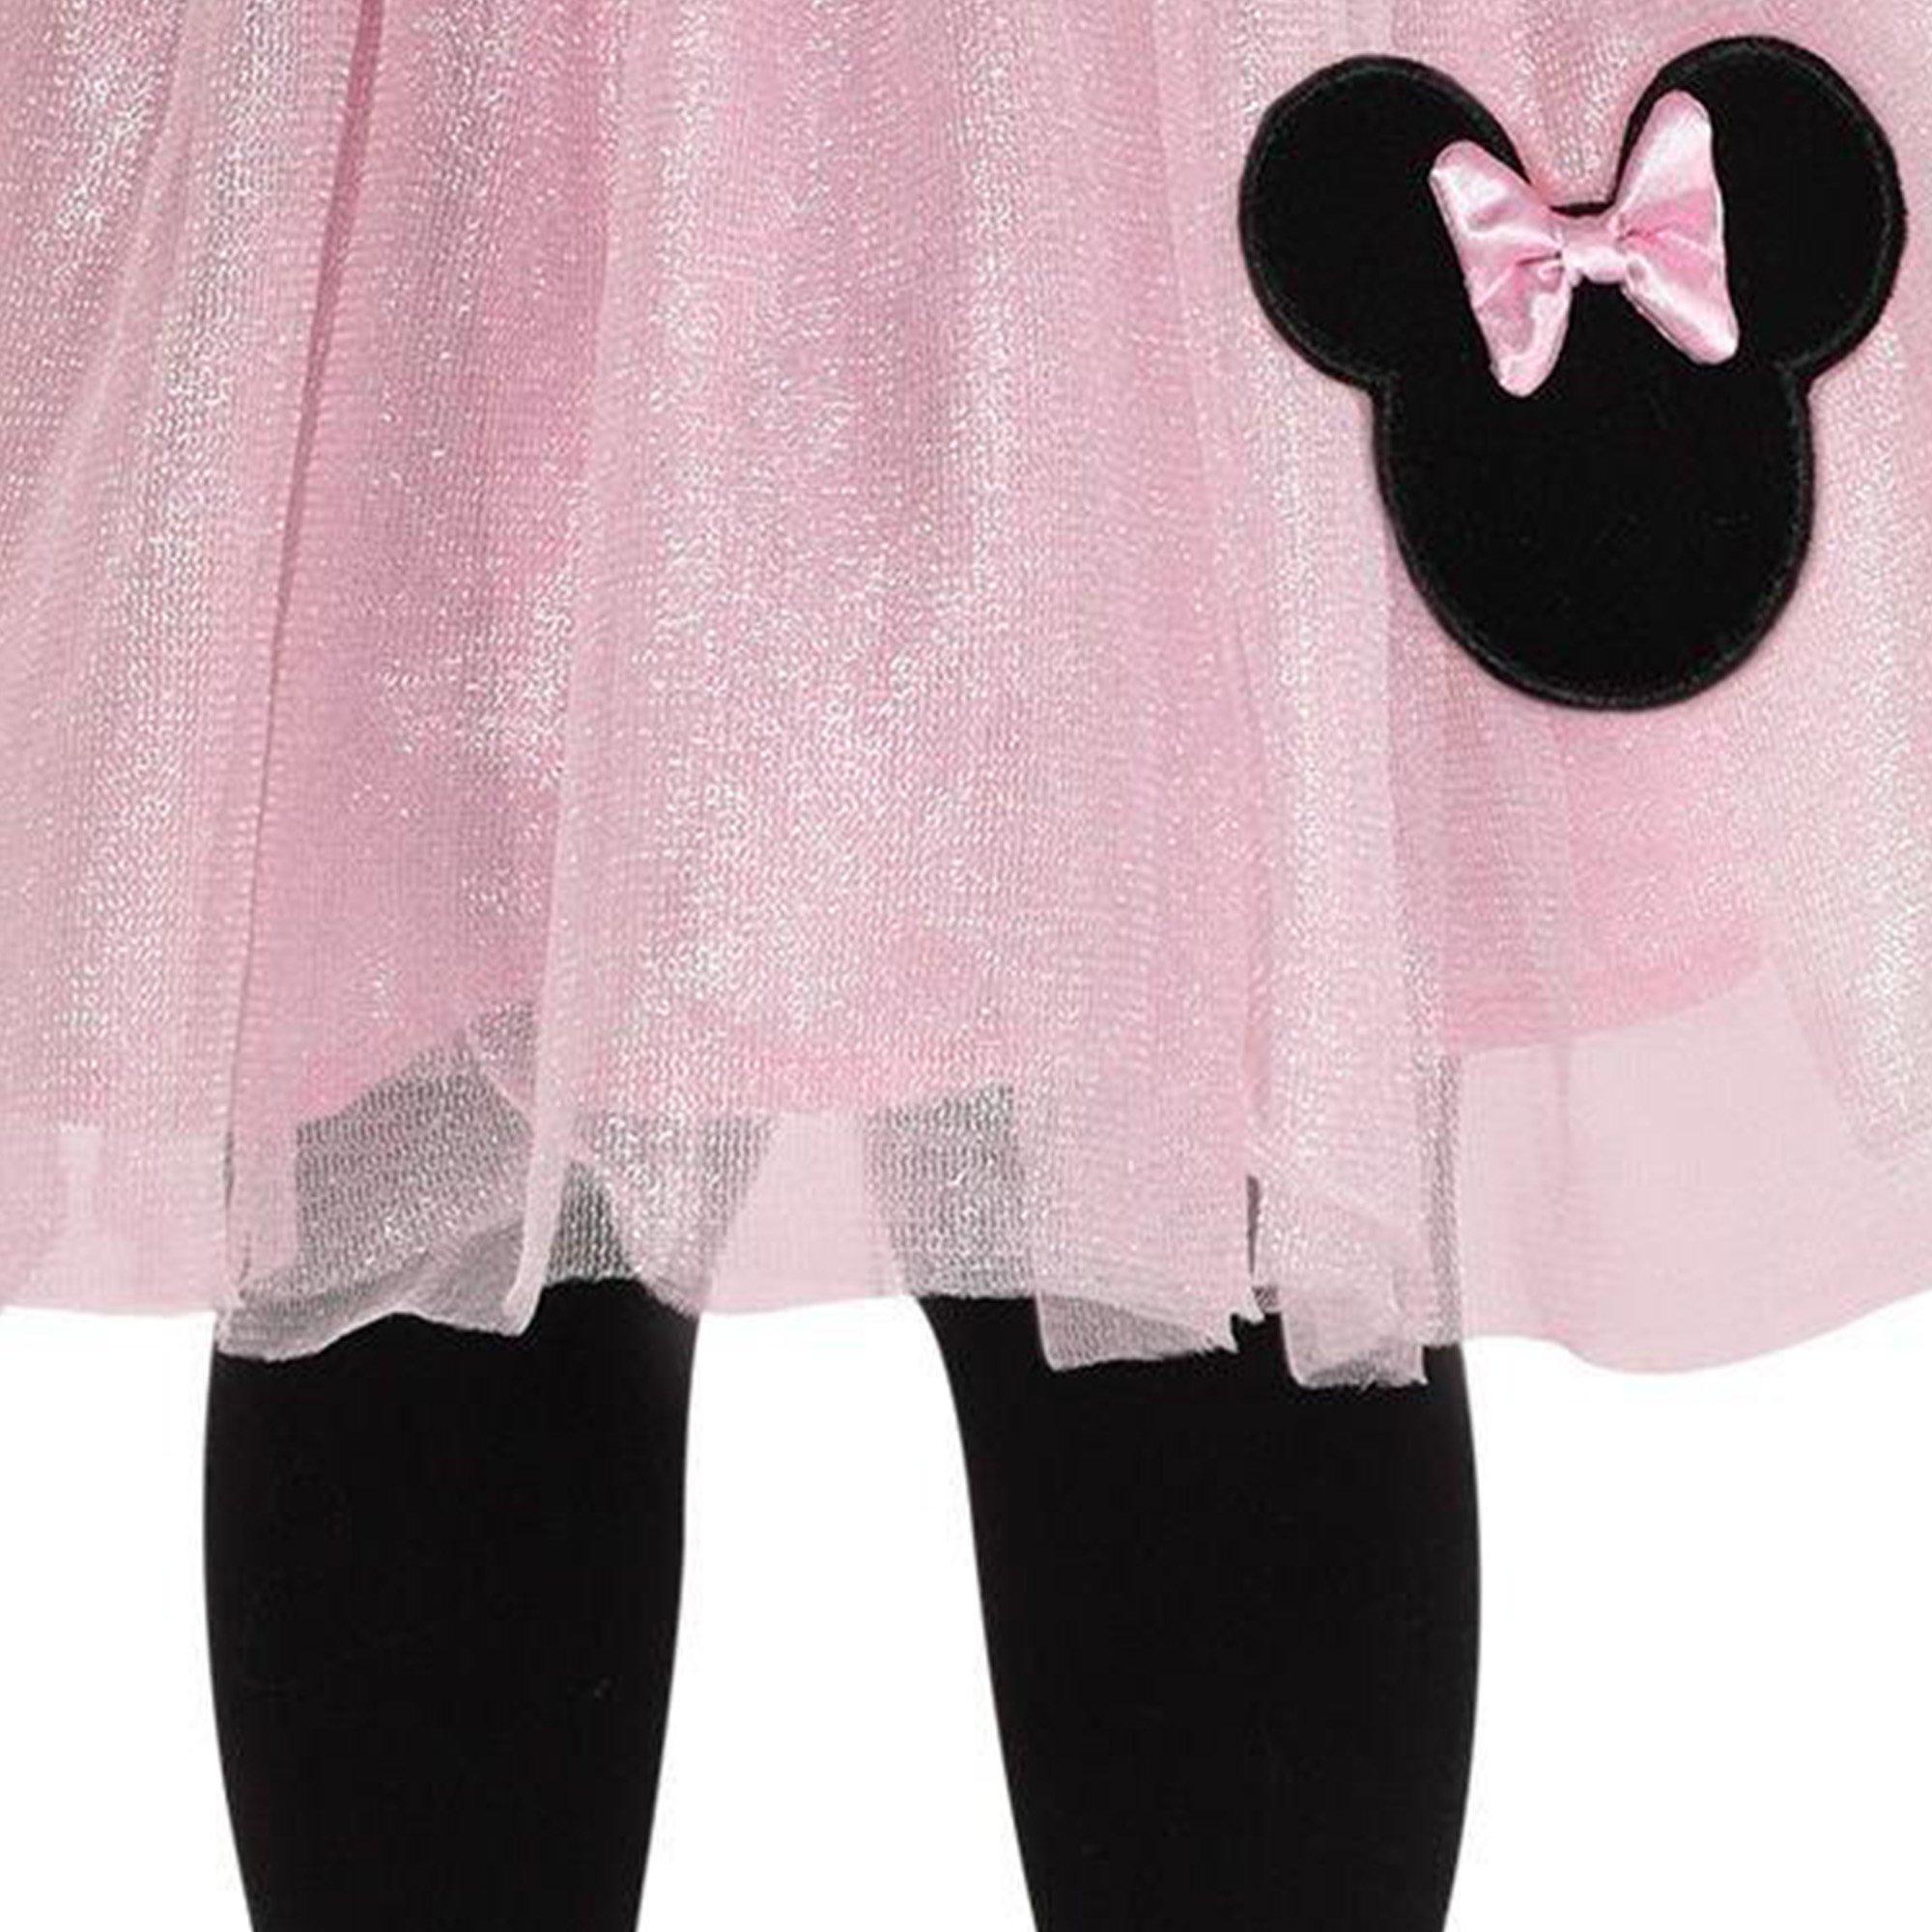 Baby Pink Minnie Mouse Costume - Disney